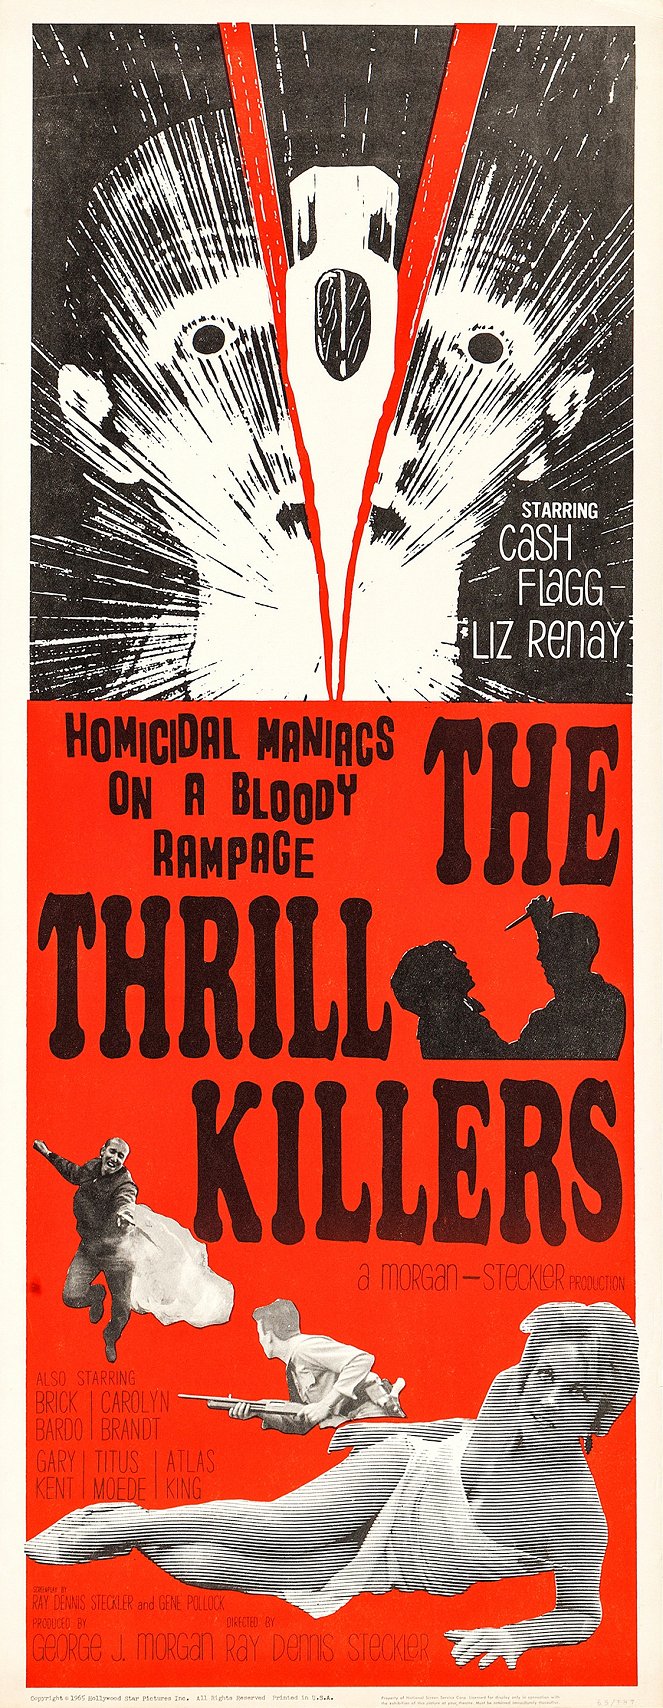 The Thrill Killers - Cartazes